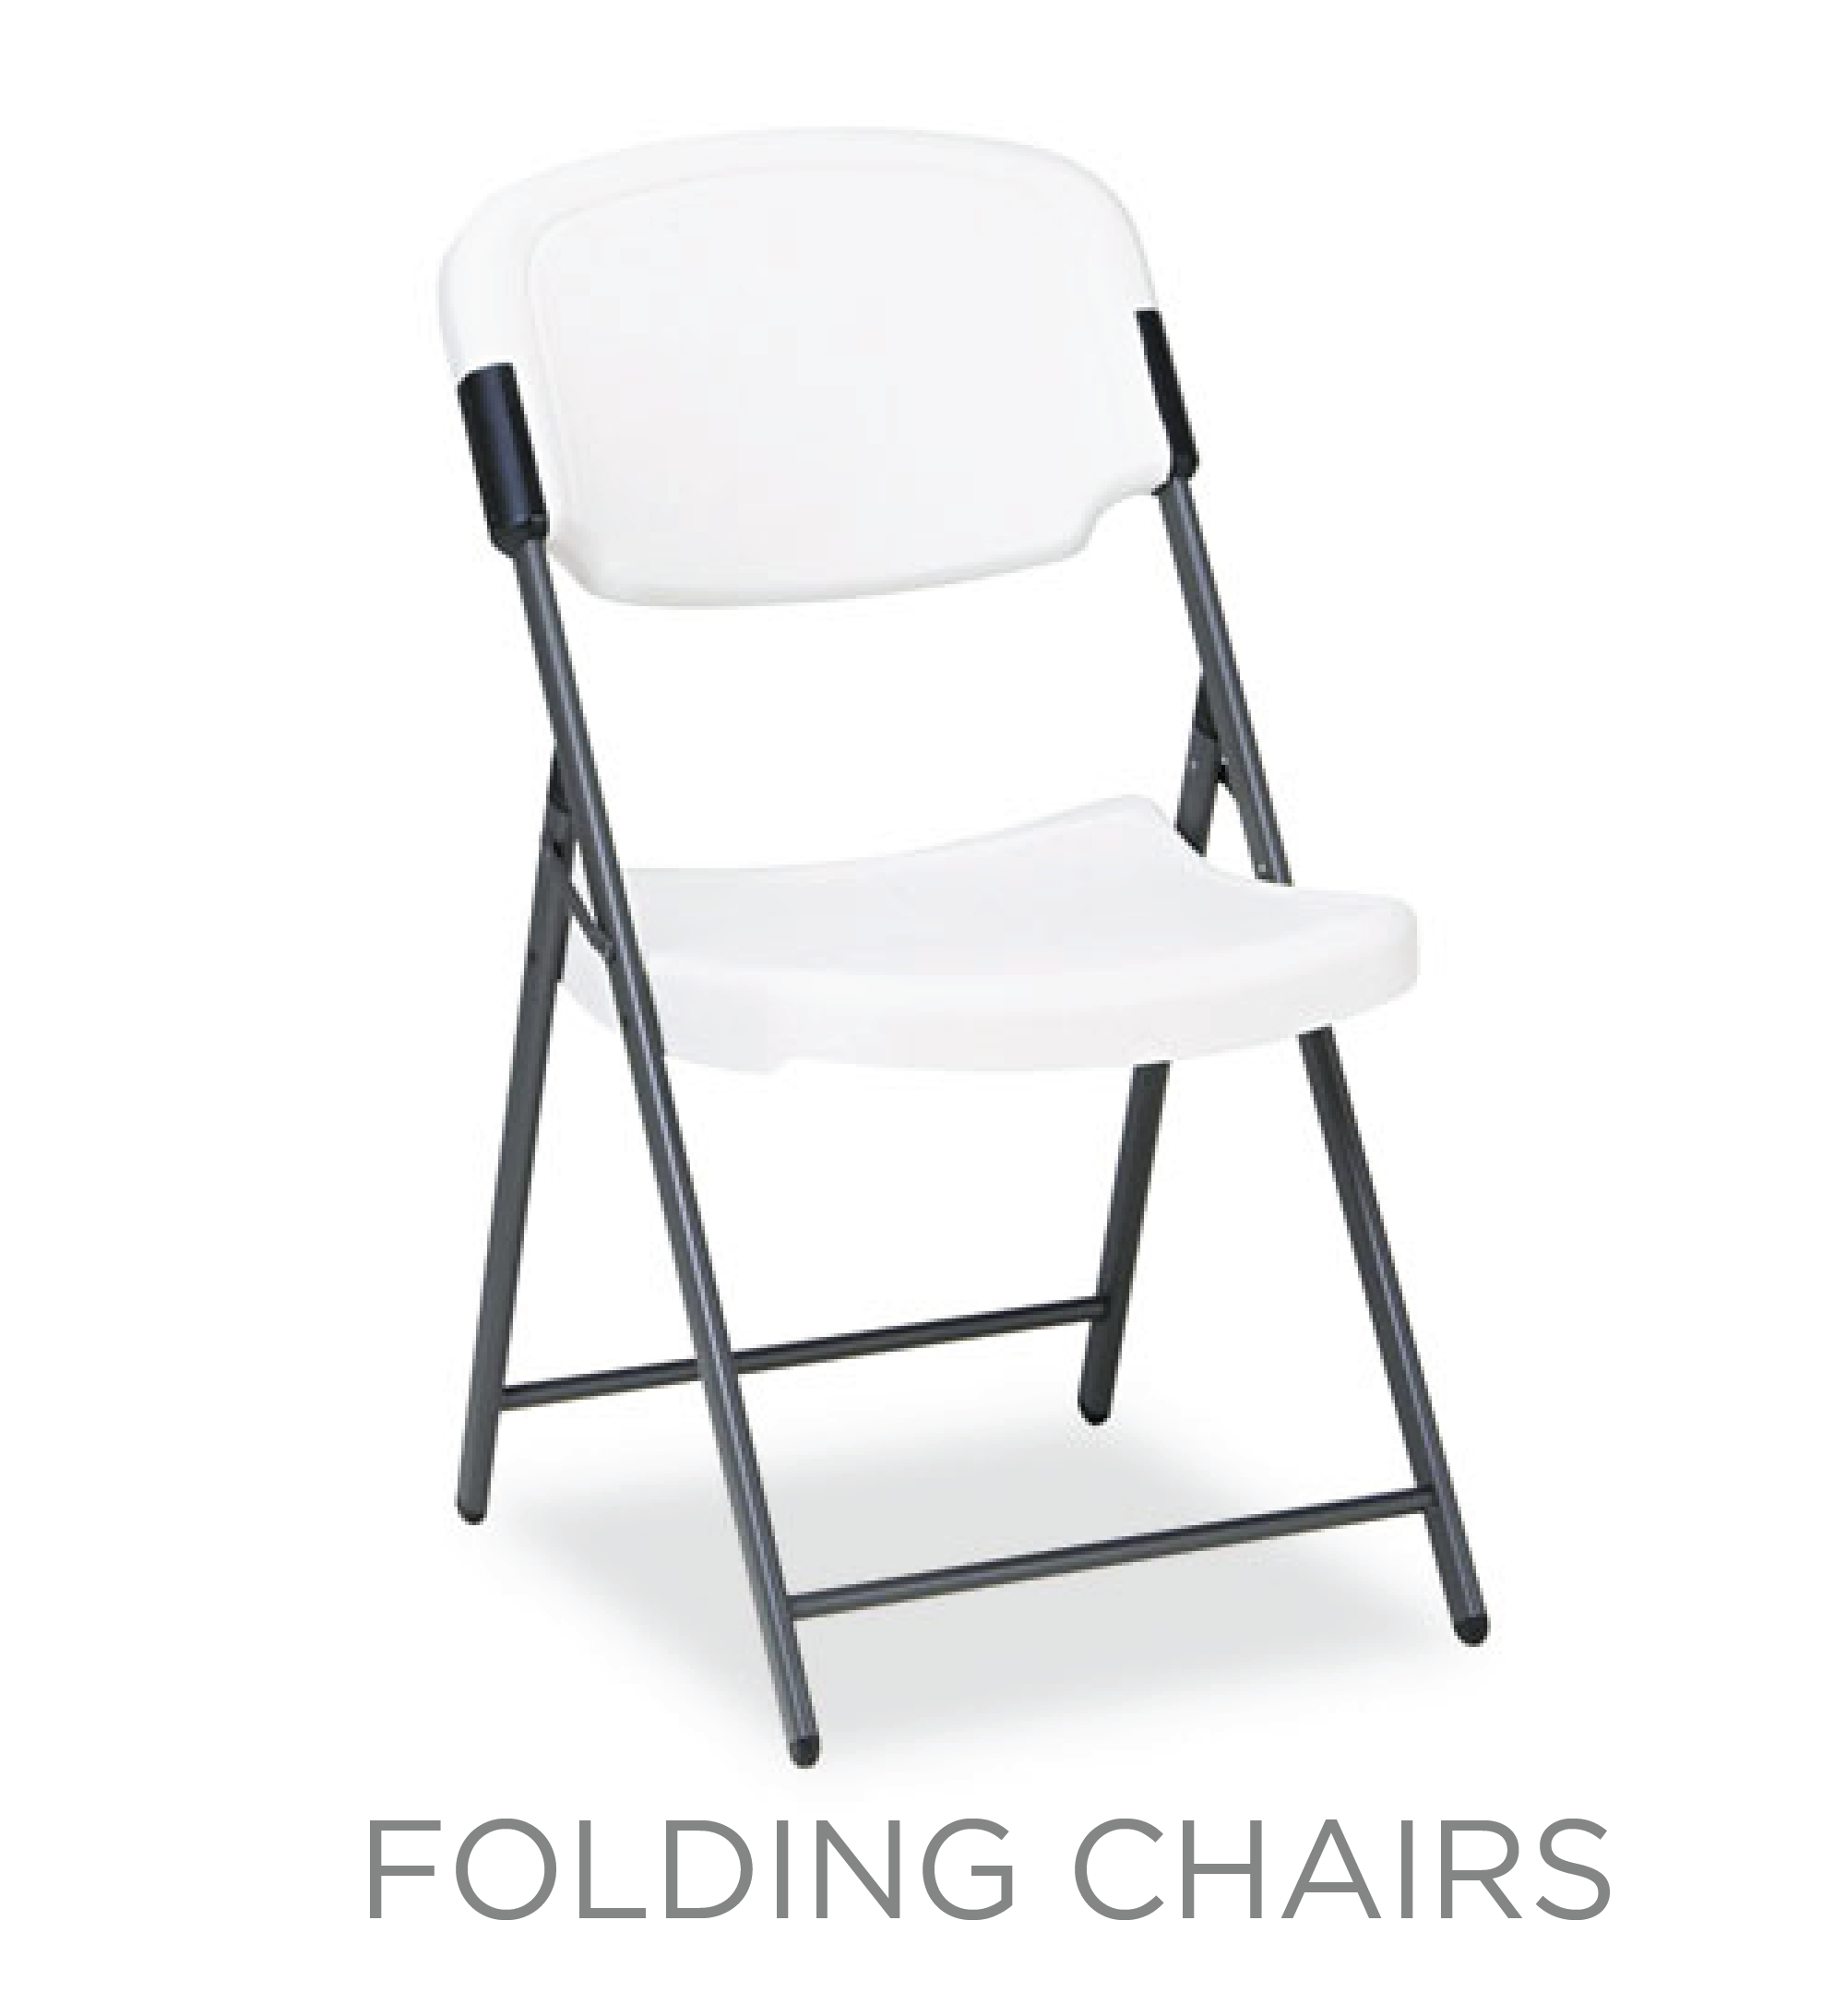 Folding Chairs - Preparing for the Holidays